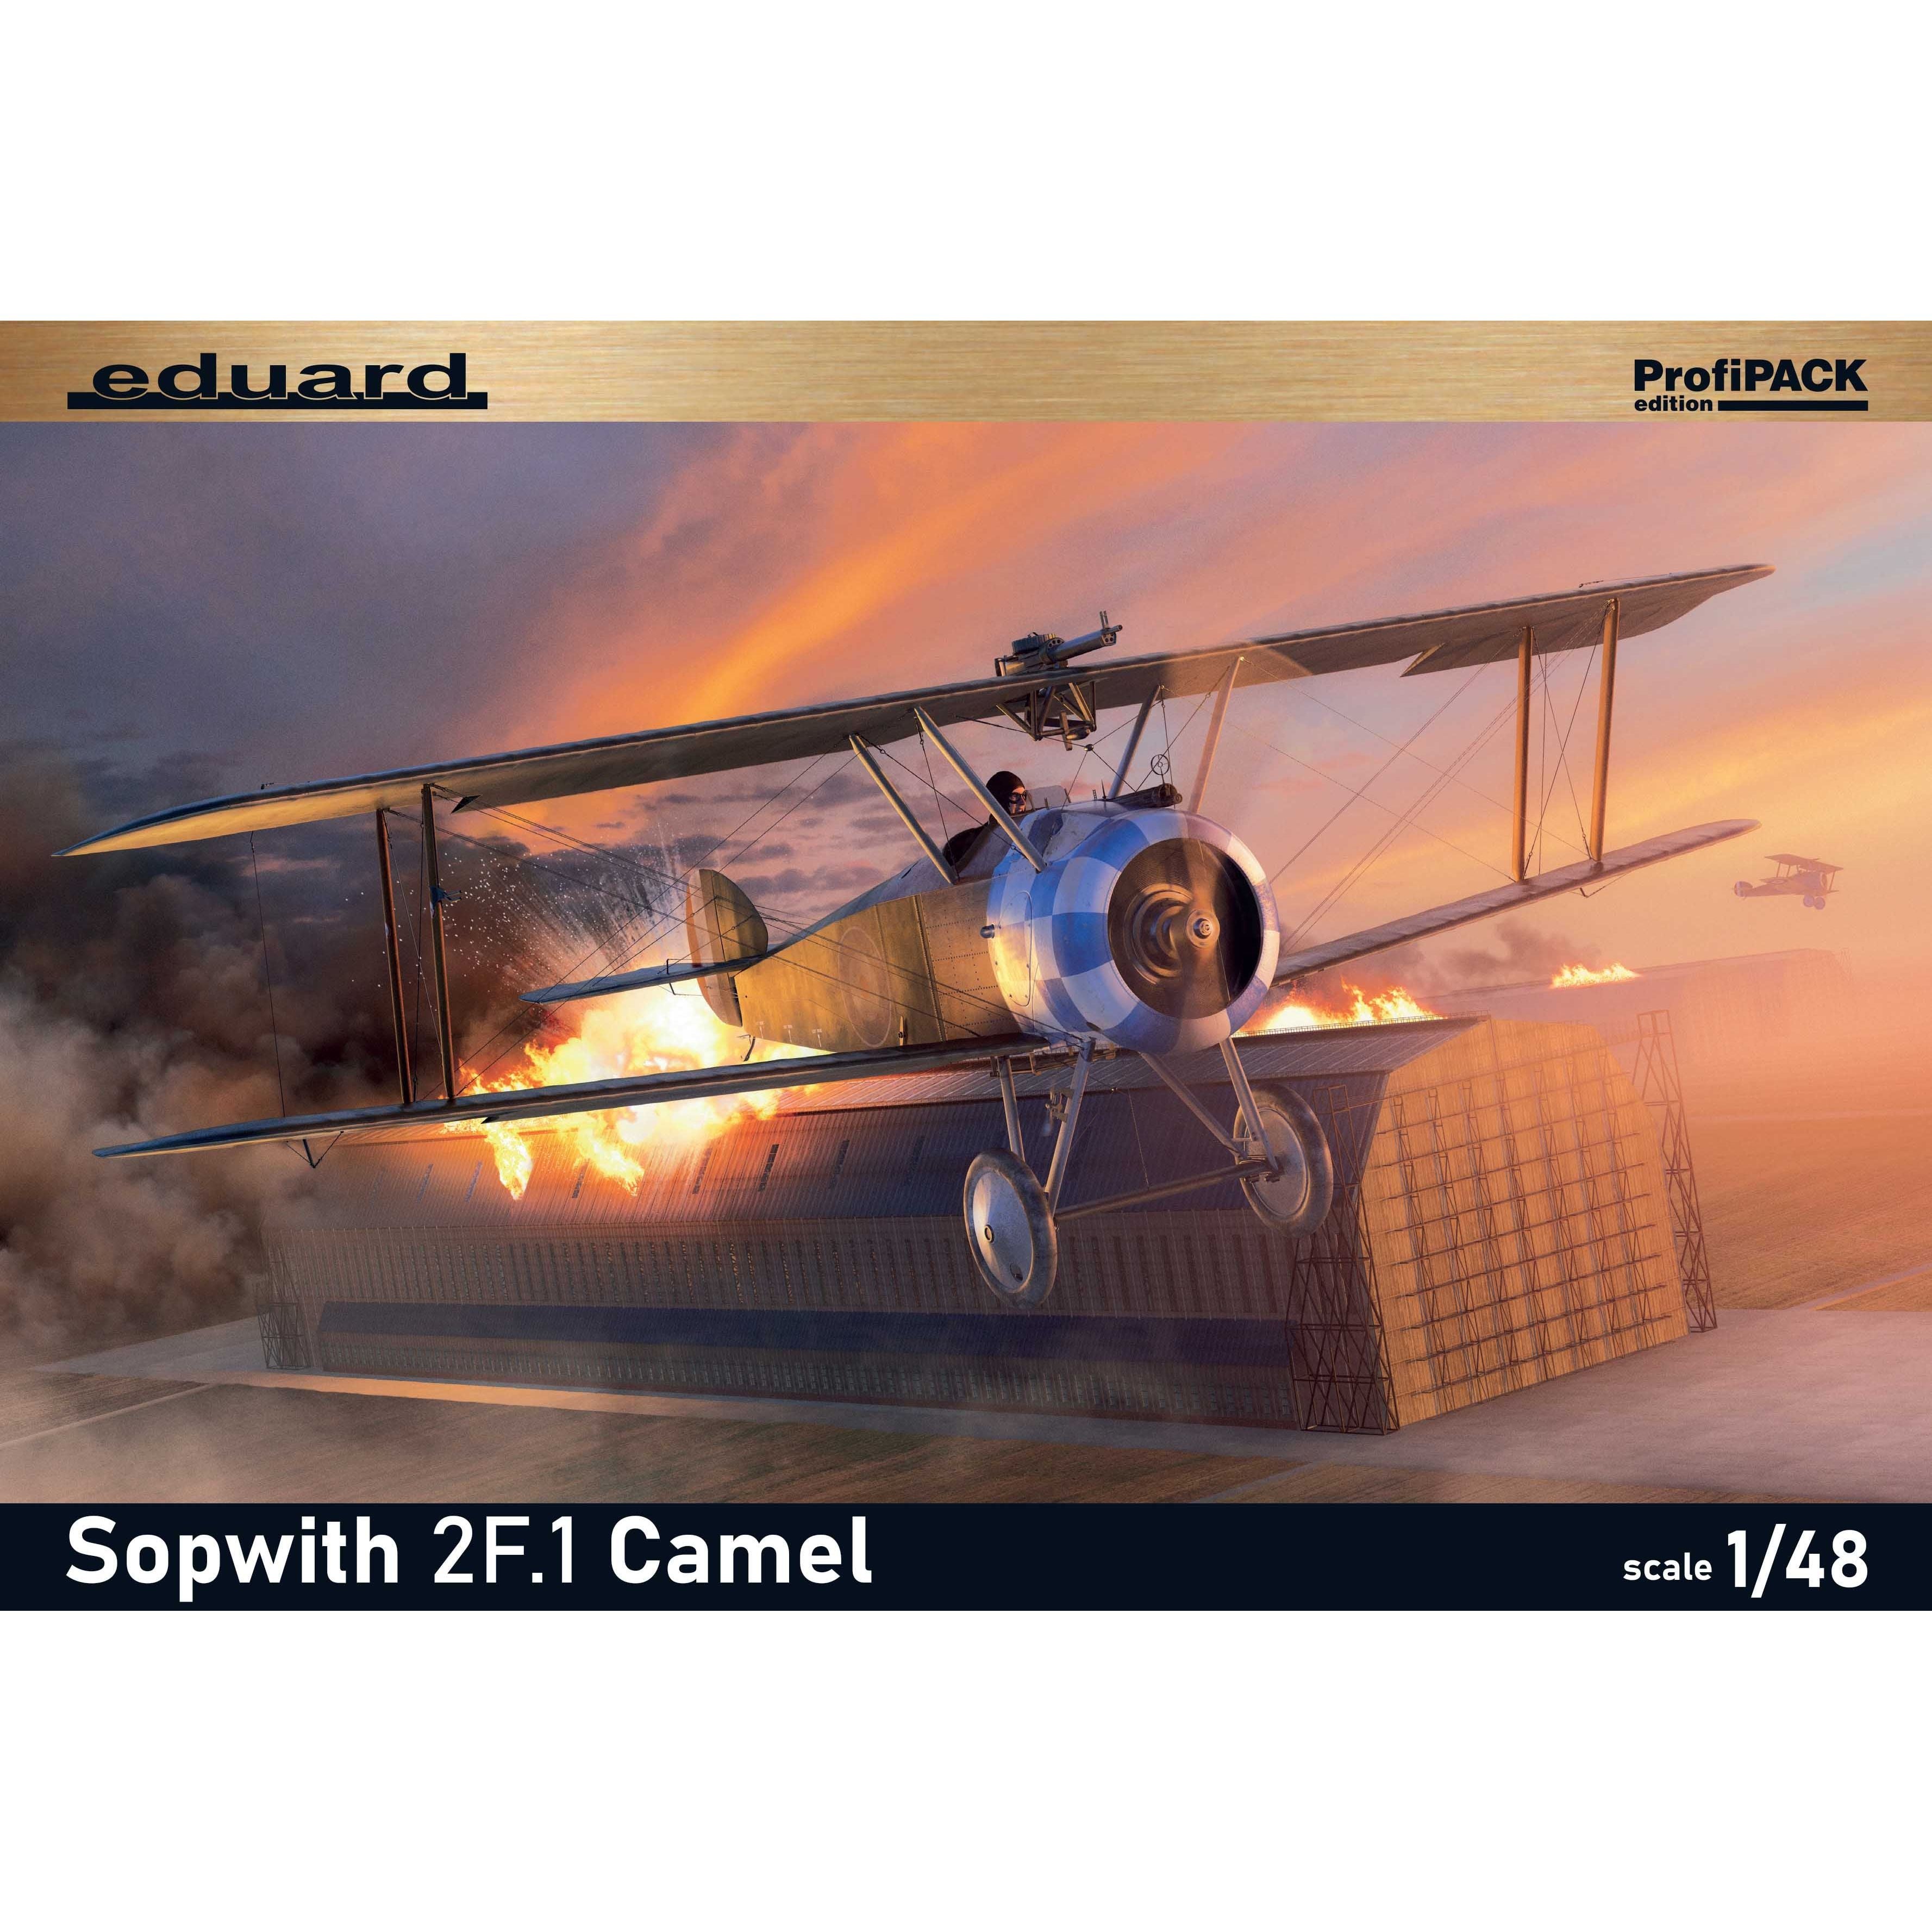 Sopwith 2F.1 Camel [Profipack] 1/48 #82173 by Eduard